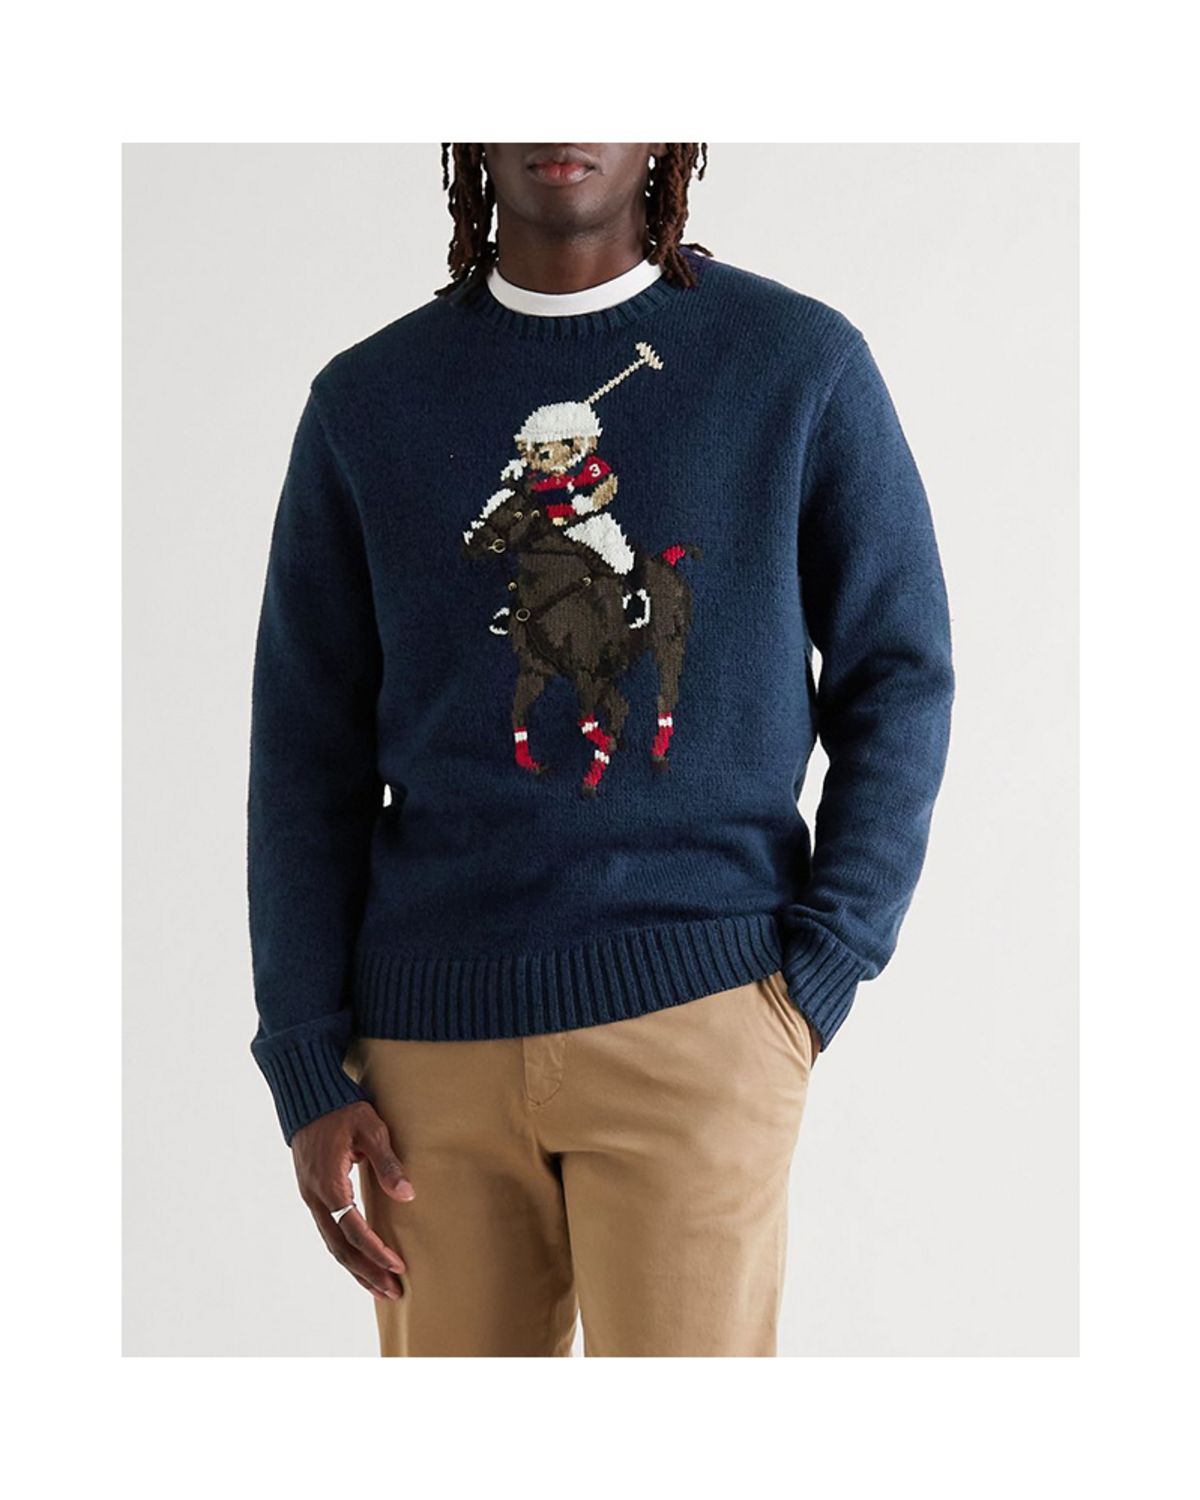 Partnership: Ralph Lauren’s New Holiday Collection | The Journal | MR ...